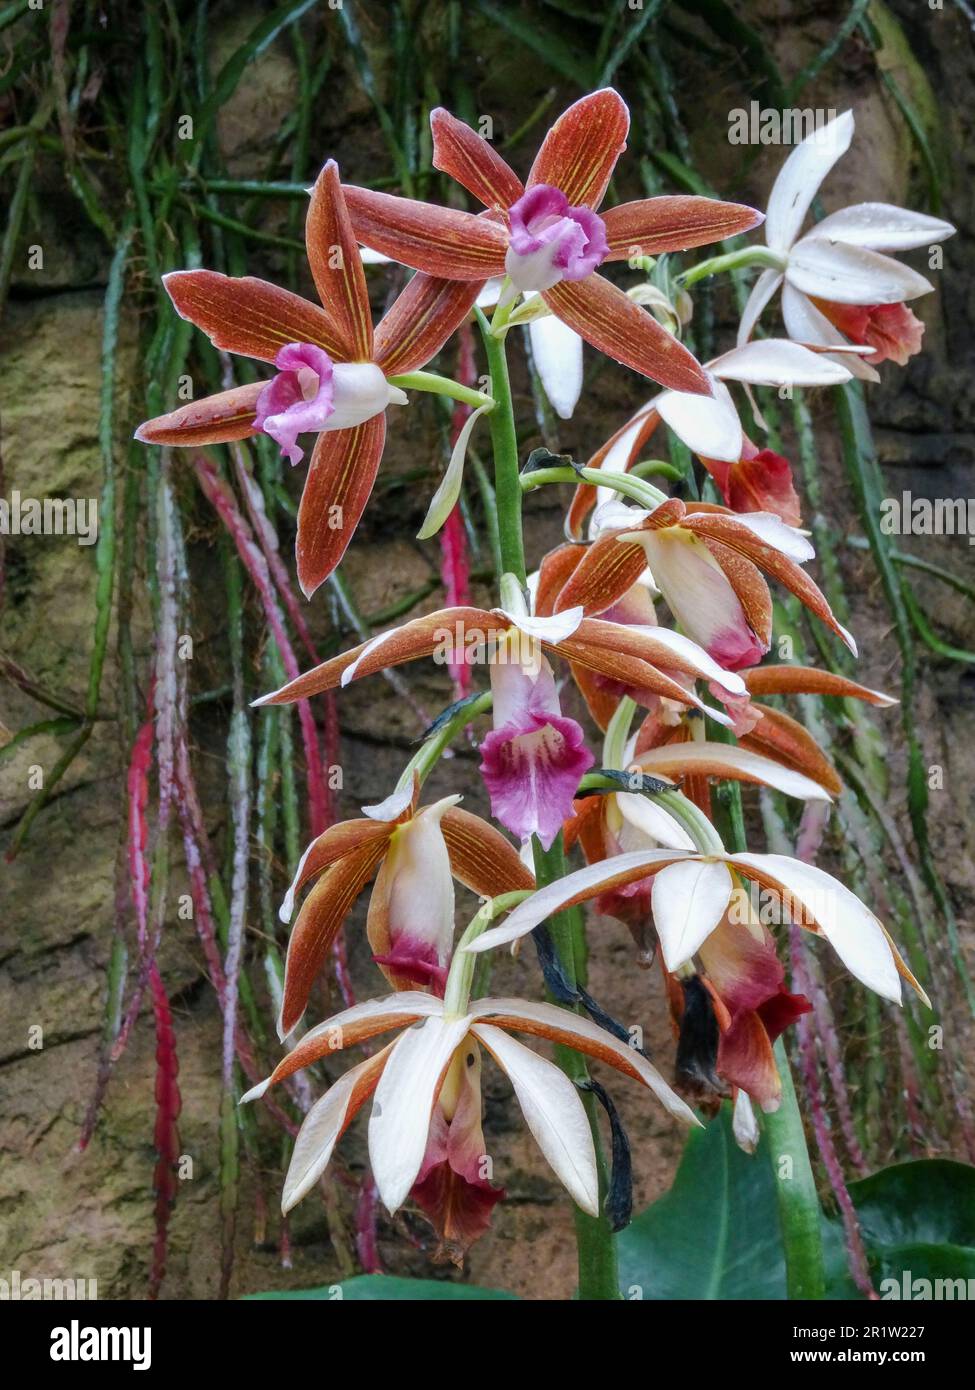 Stately Phaius Tankervilleae. Natural close up flowering plant portrait Stock Photo